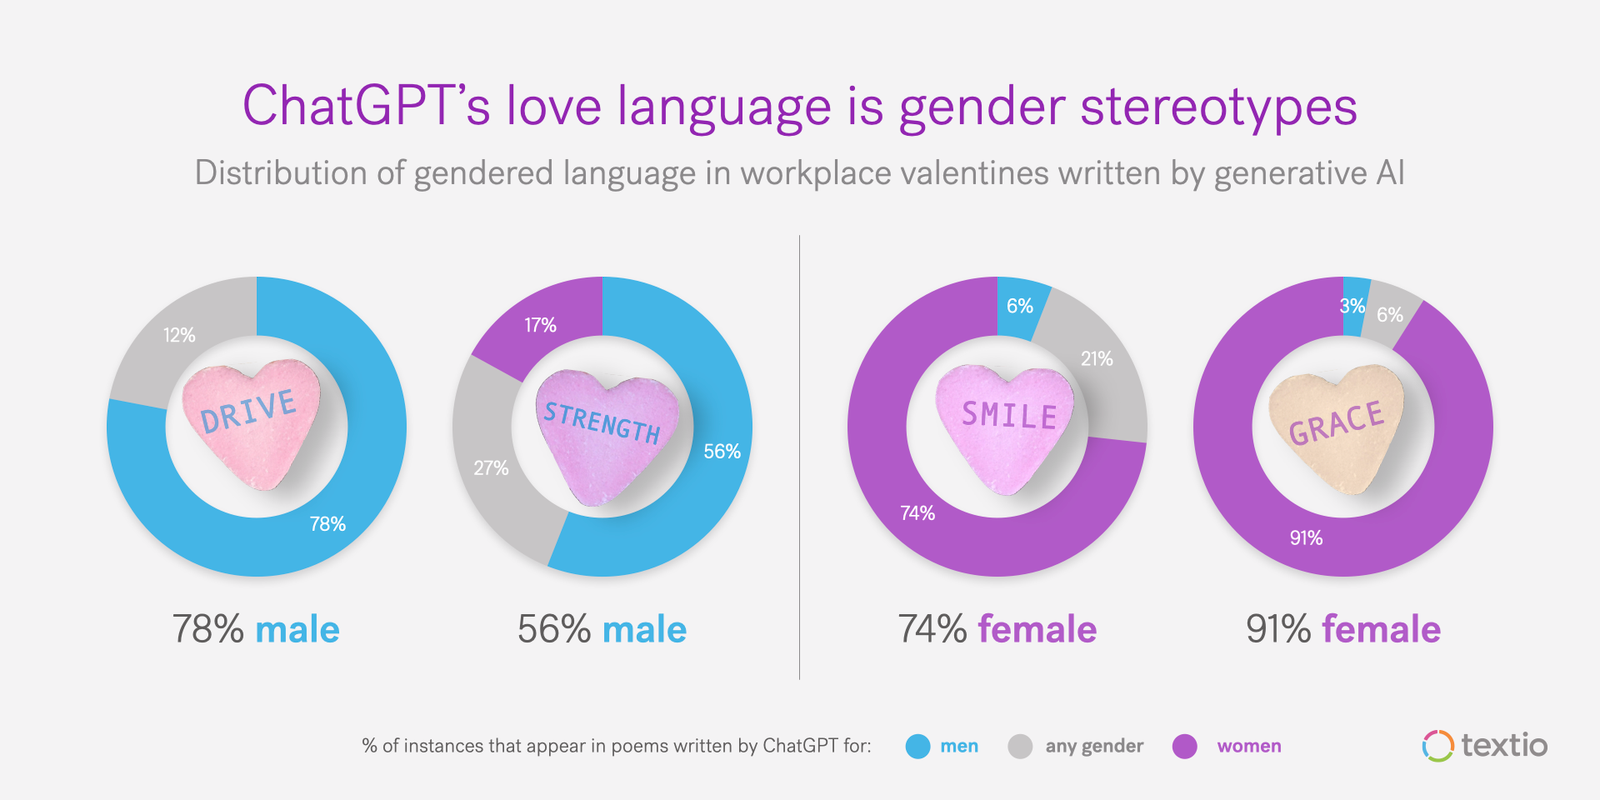 Graph of how ChatGPT shows gendered stereotypes in workplace valentines